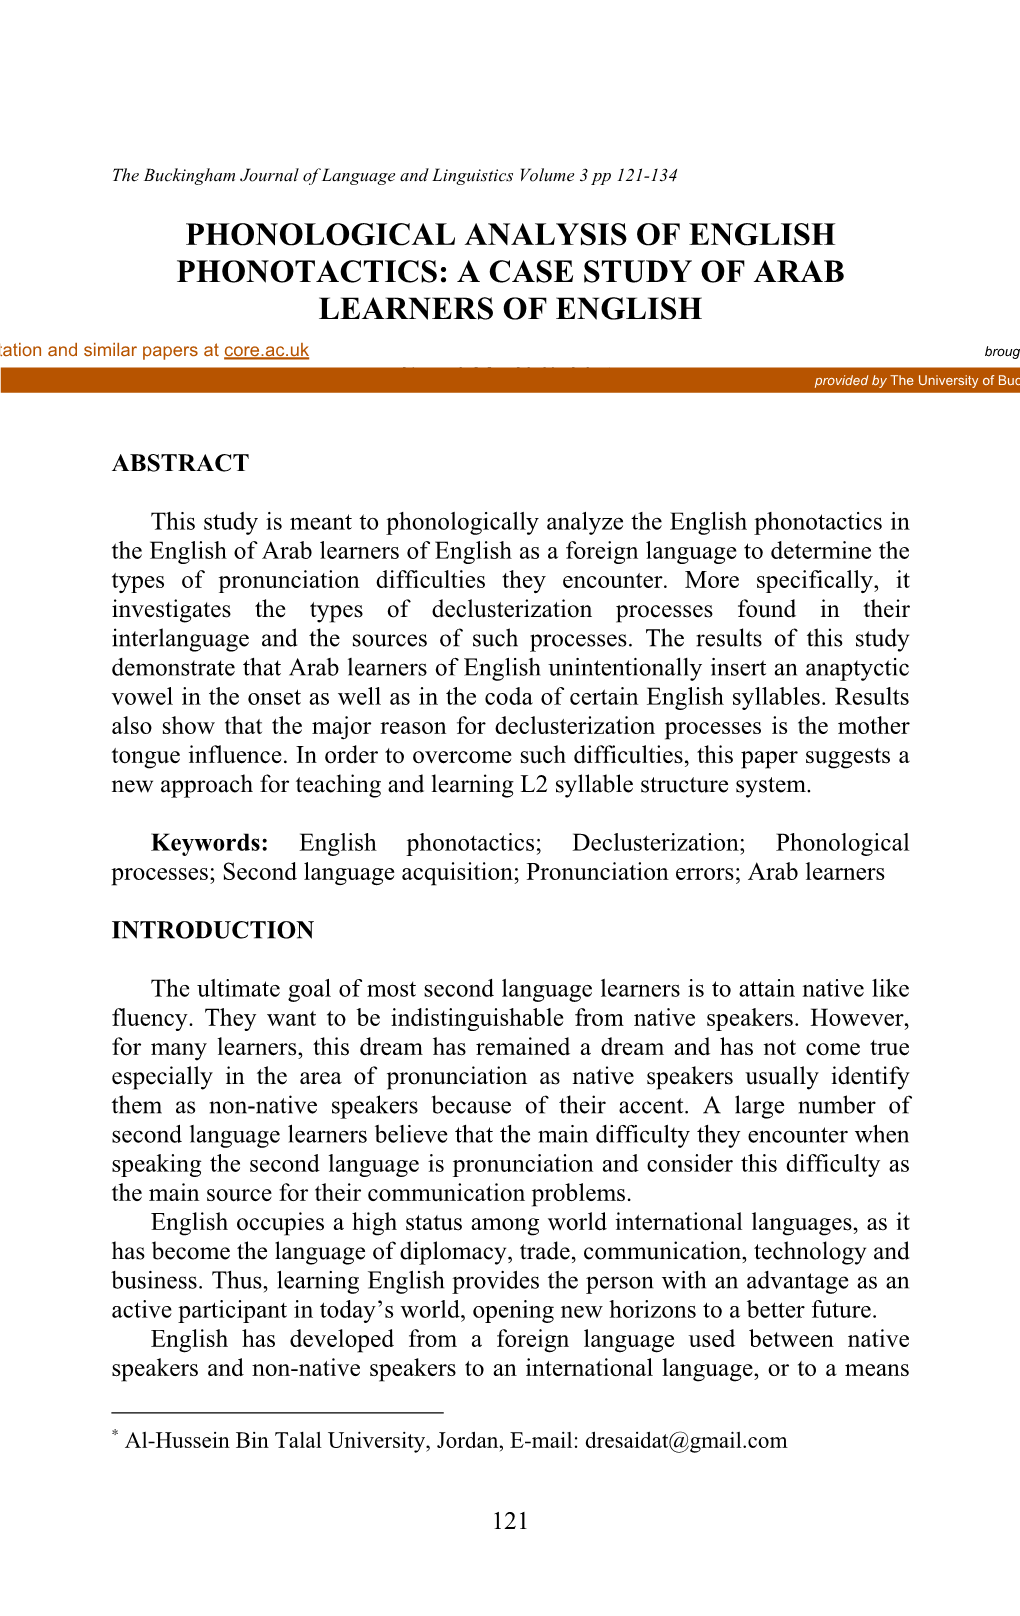 Phonological Analysis of English Phonotactics: a Case Study of Arab Learners of English